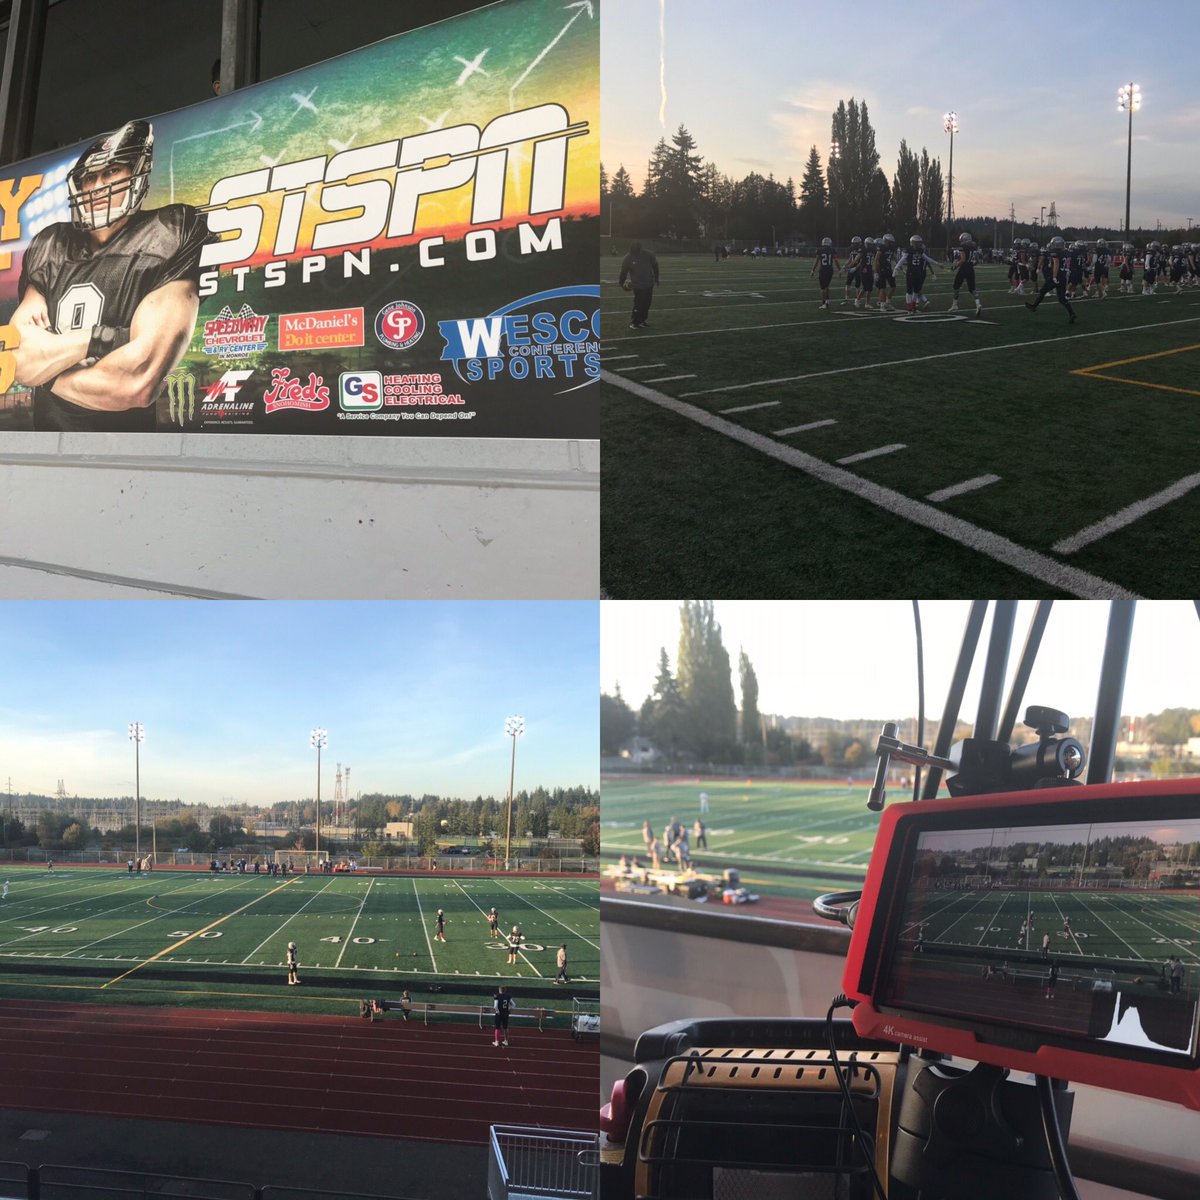 Another Friday Night Lights! @LSHSVikingsFTB vs @GPGrizzFootball in a backyard brawl. @SnohomishSports will be carrying on YouTube and Twitter. #FridayNightLights #hsfootball #enjoyit #sidelinereporter